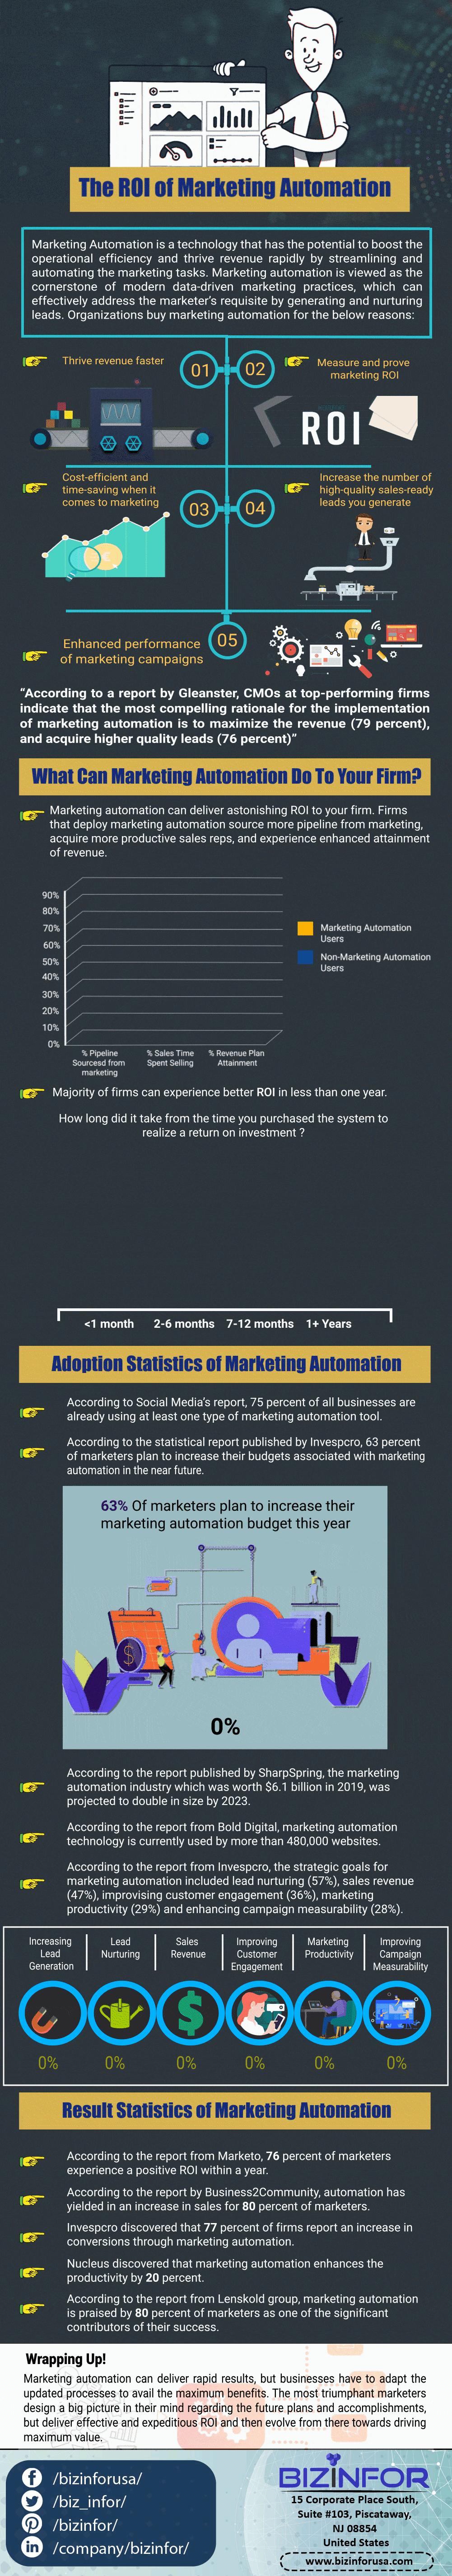 The-ROI-of-Marketing-Automation